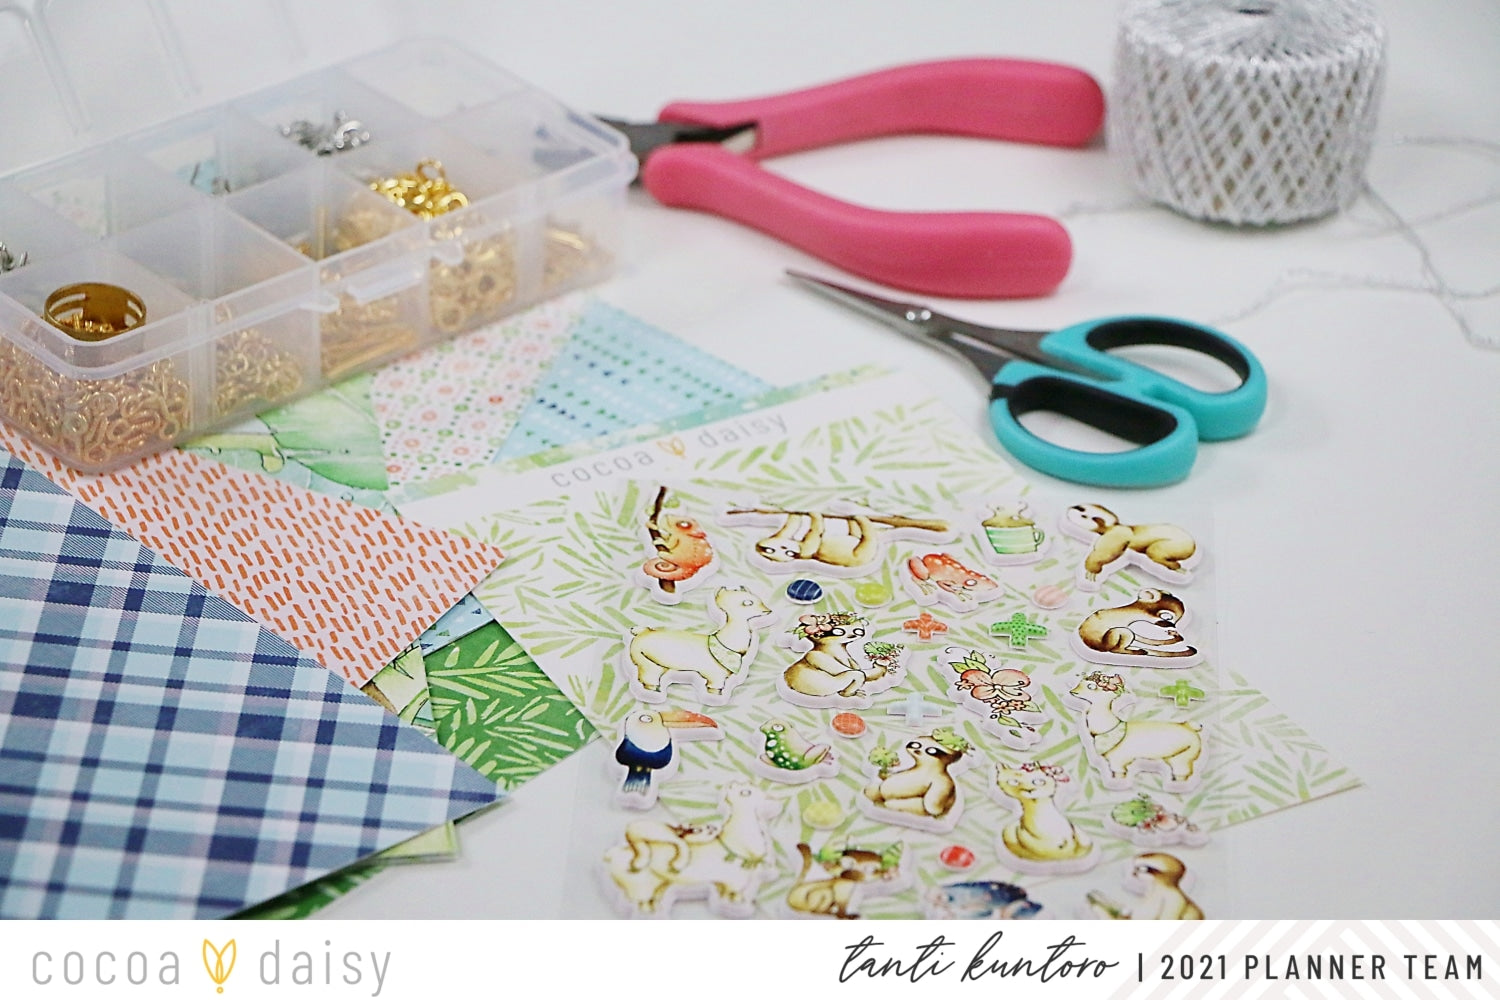 Decorating your planner using puffy sticker